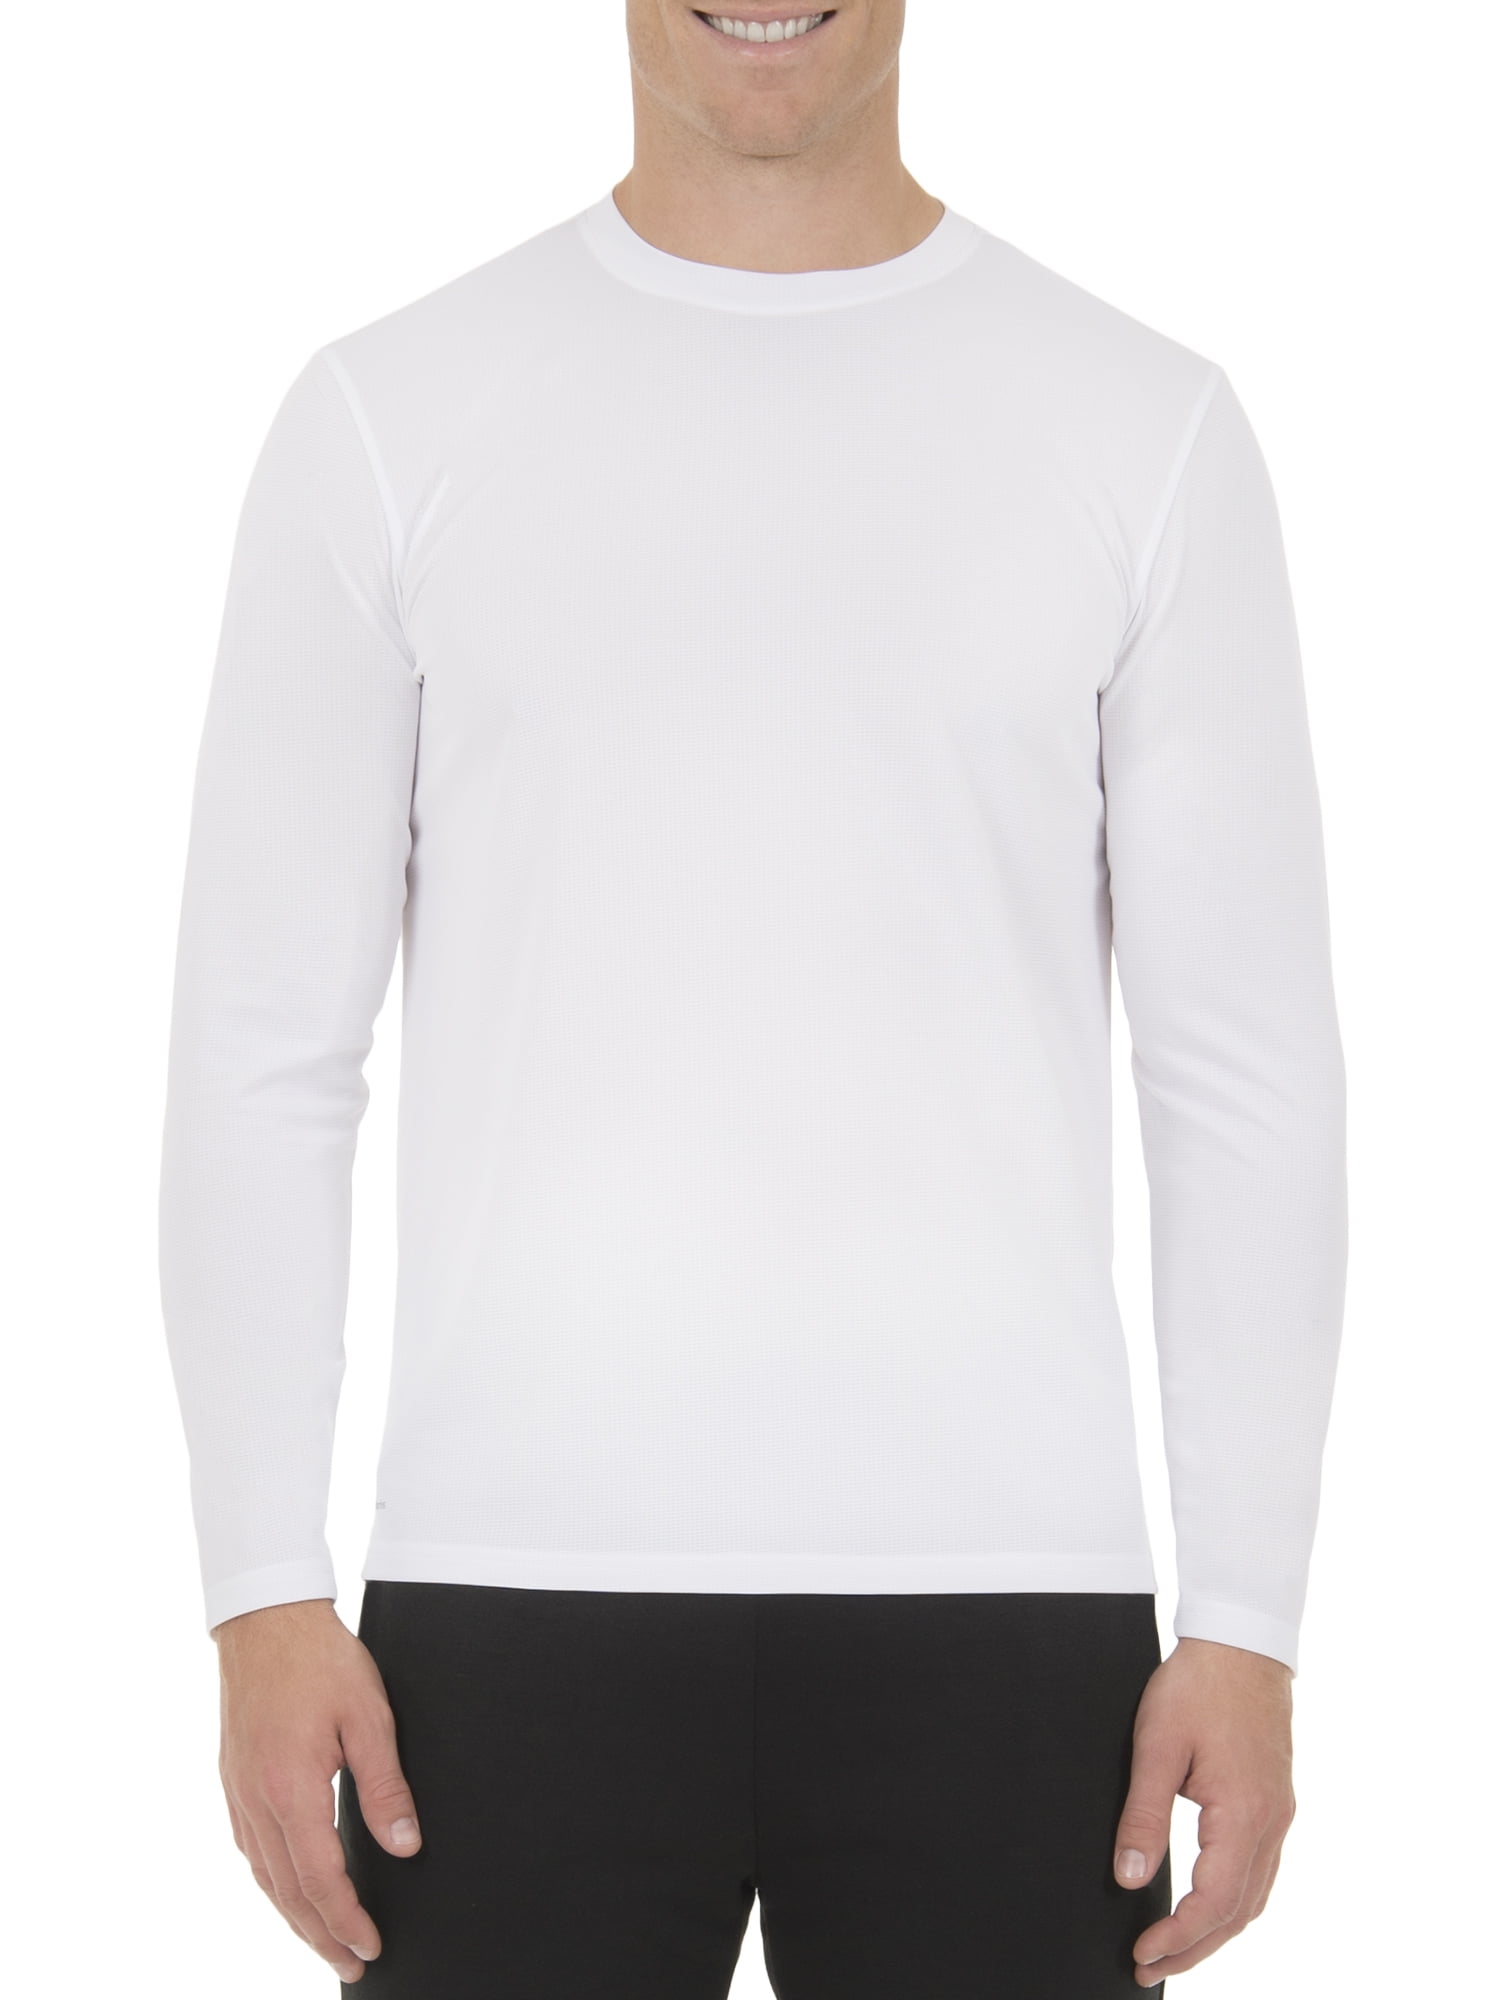 driworks long sleeve shirts